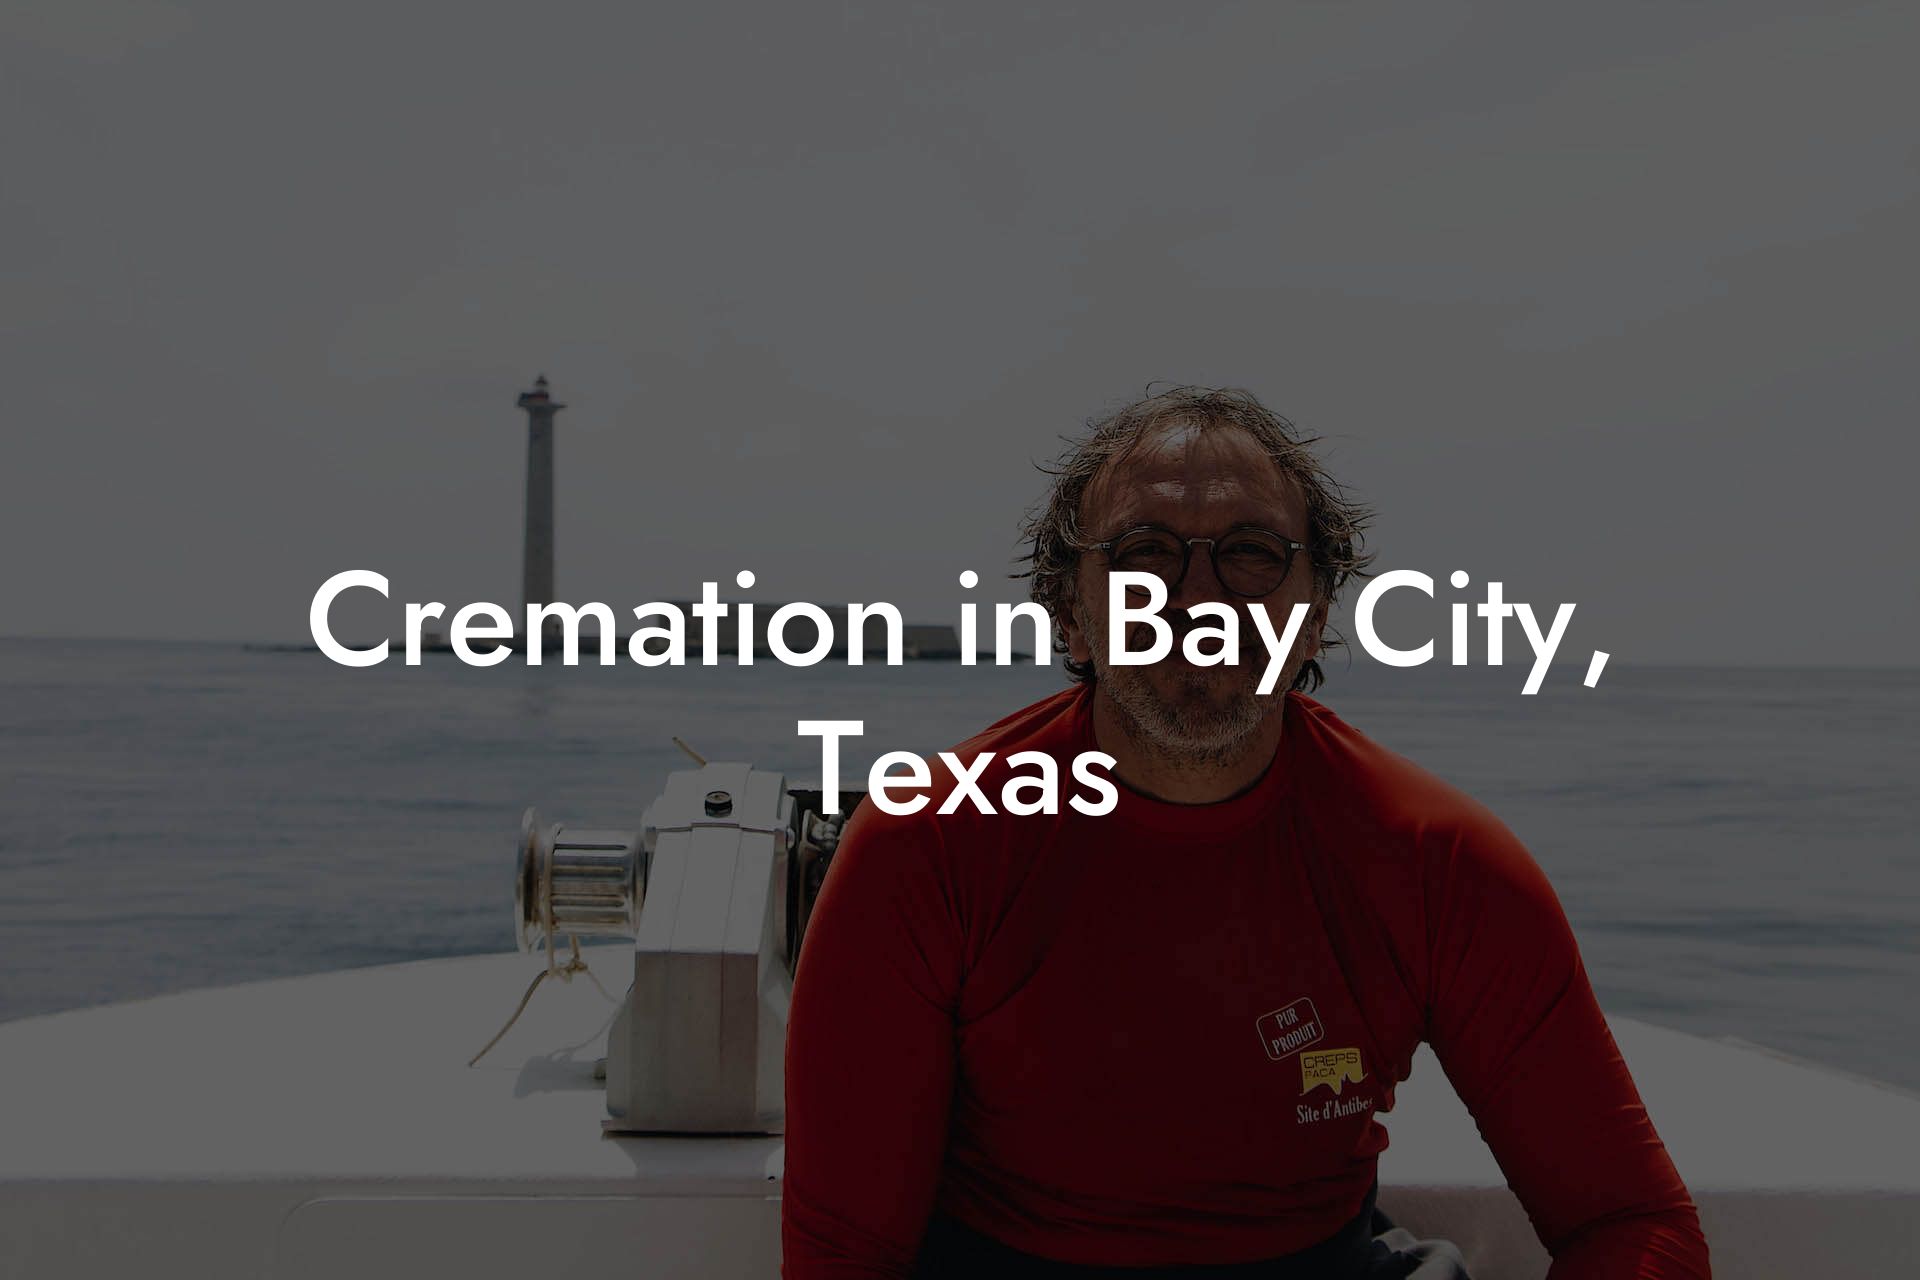 Cremation in Bay City, Texas